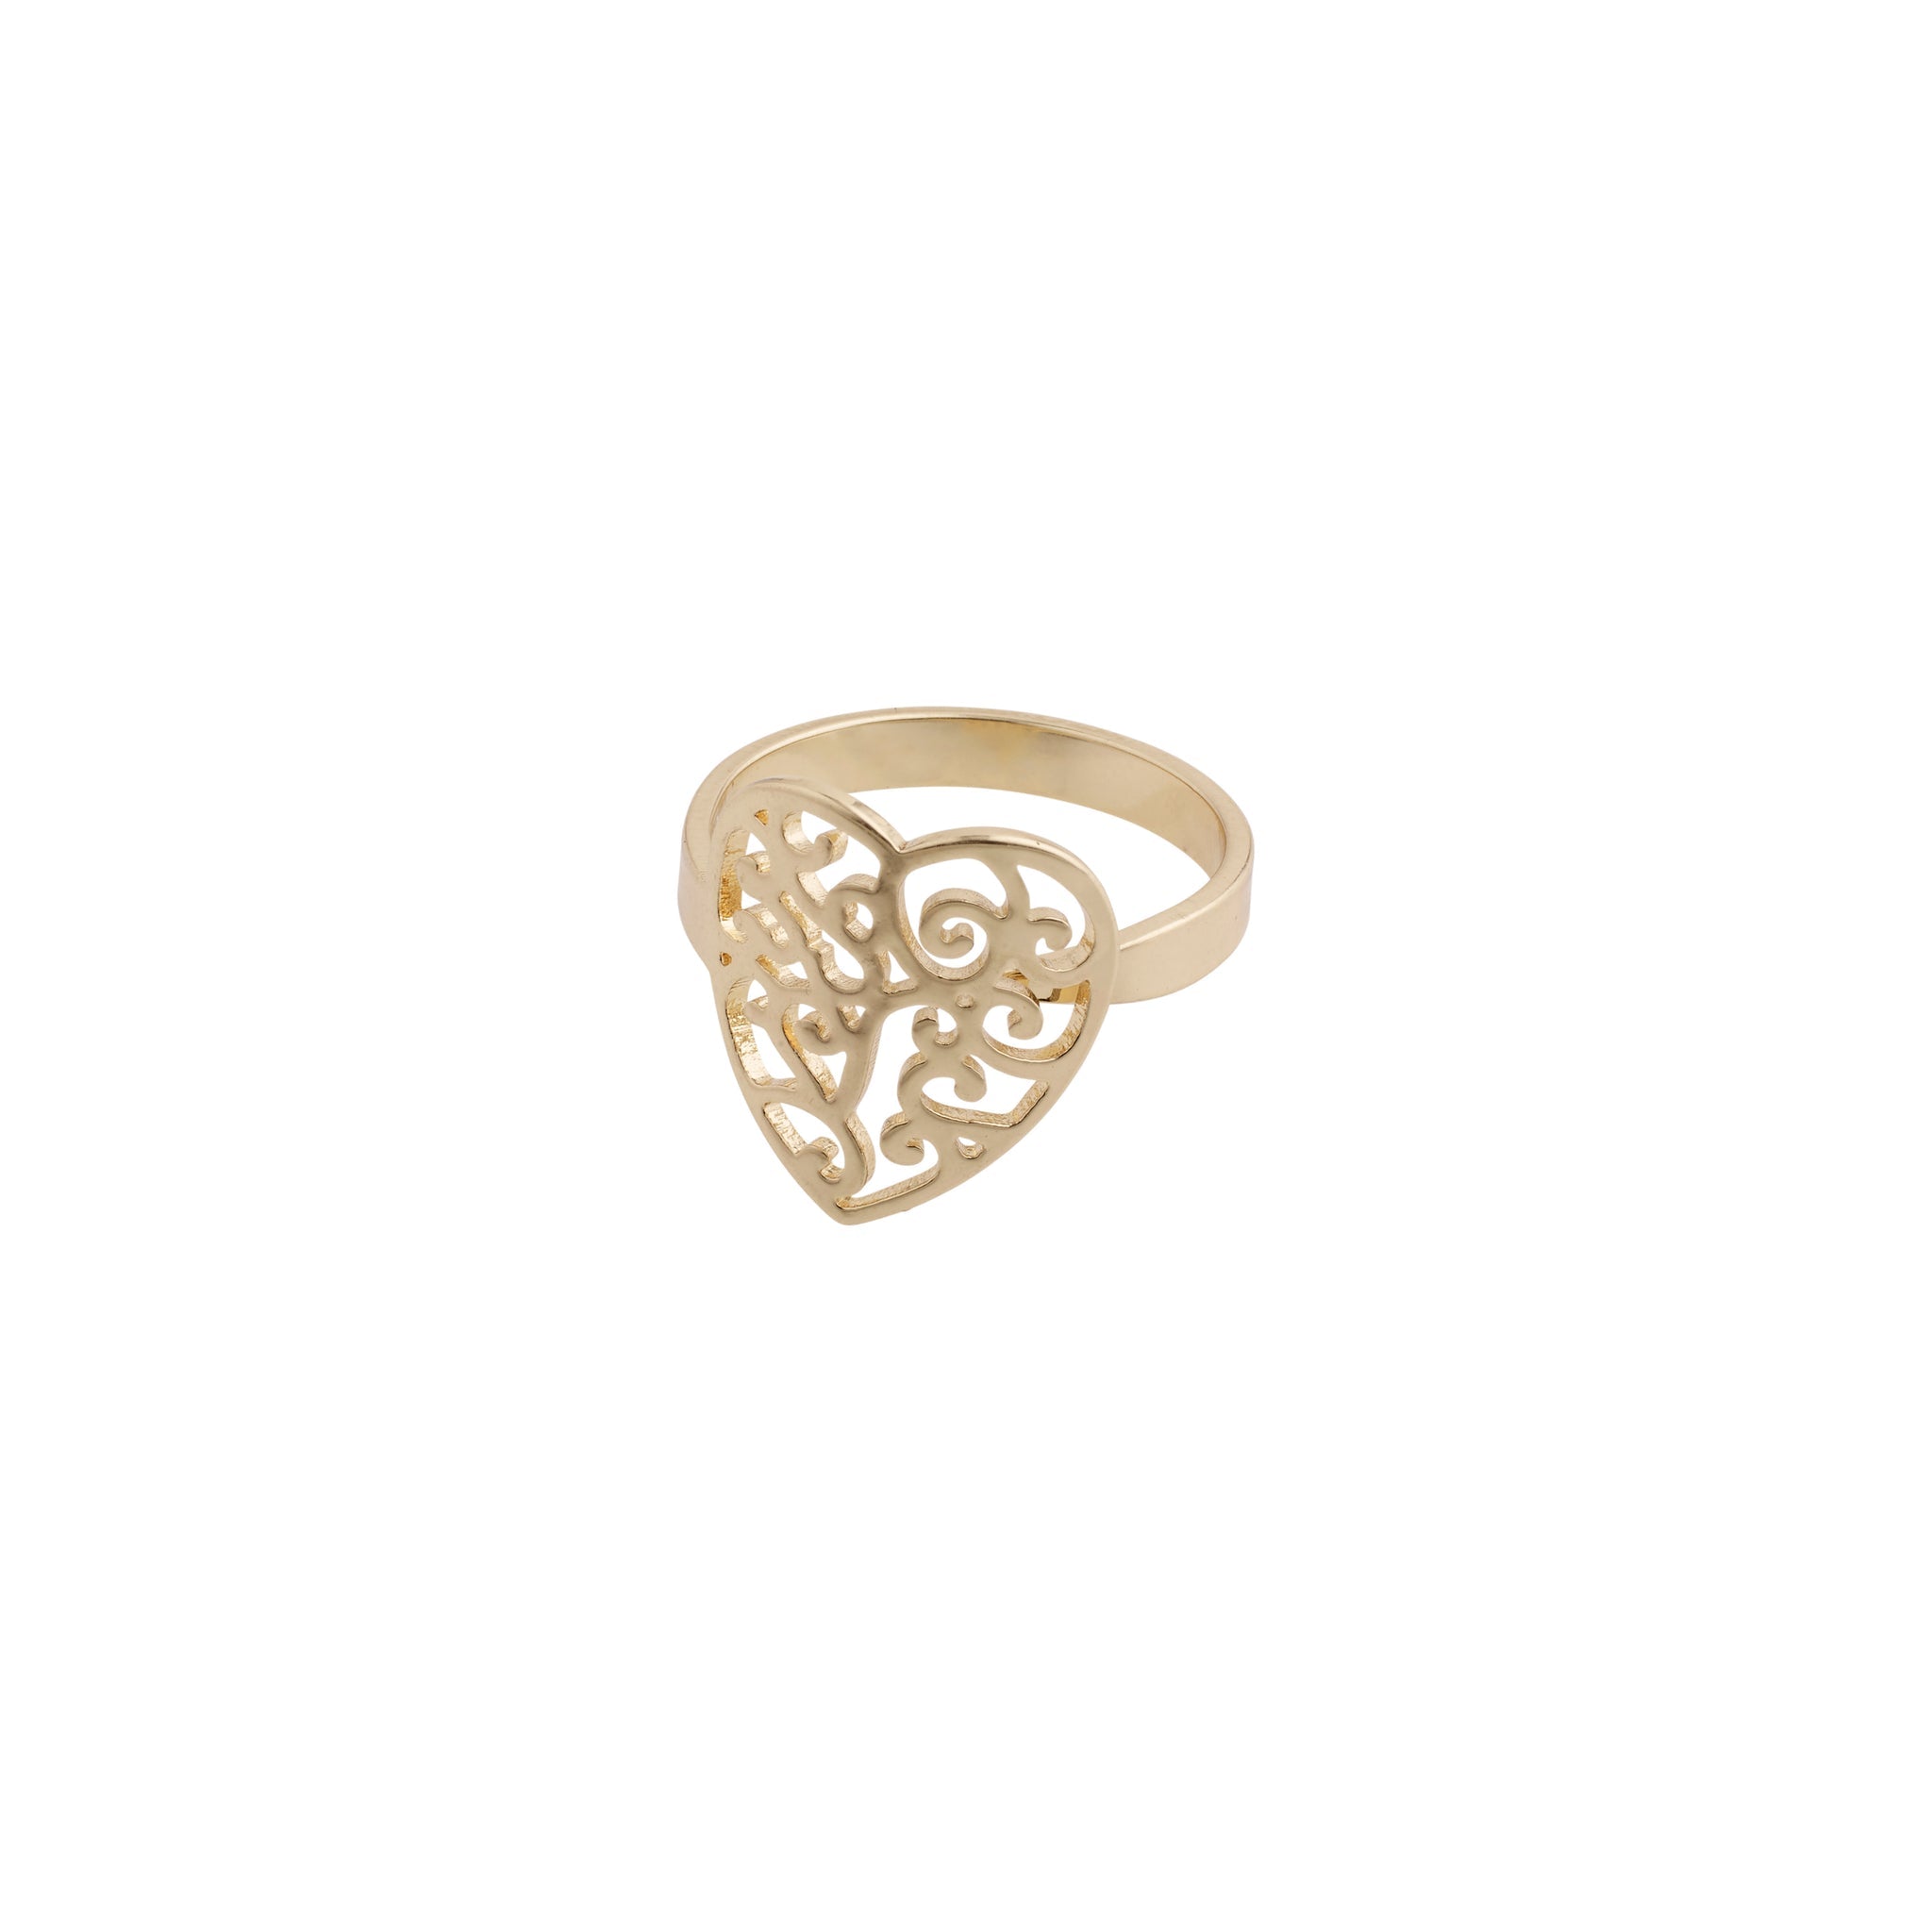 Felice Ring - Gold Plated